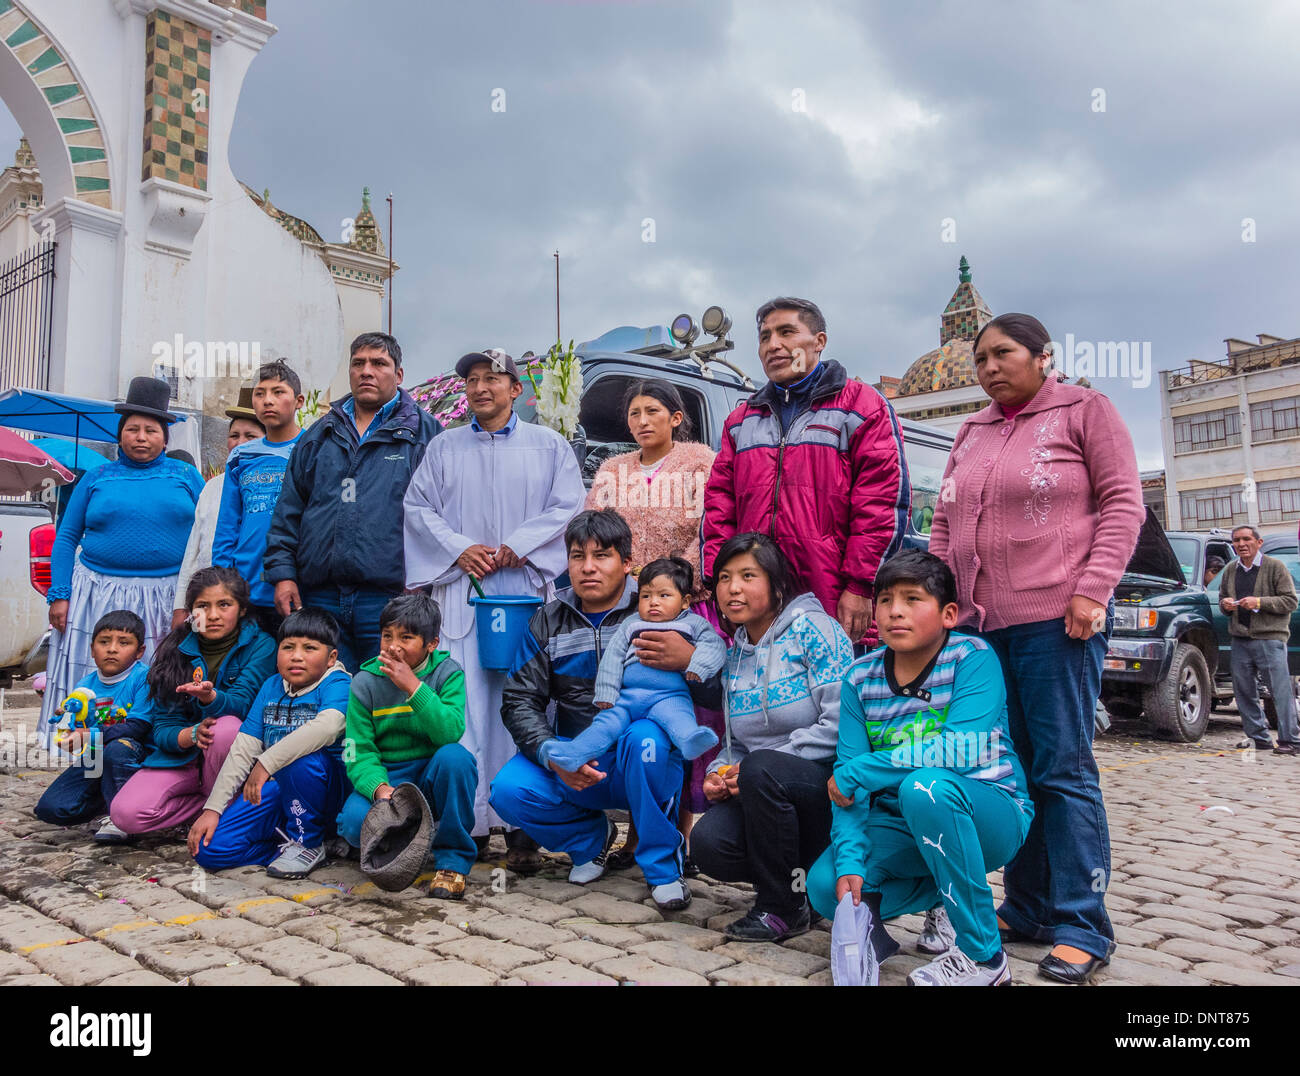 A large family grouping, at the blessing of the automobiles in front of the Basilica of Our Lady of Copacabana, Bolivia. Stock Photo